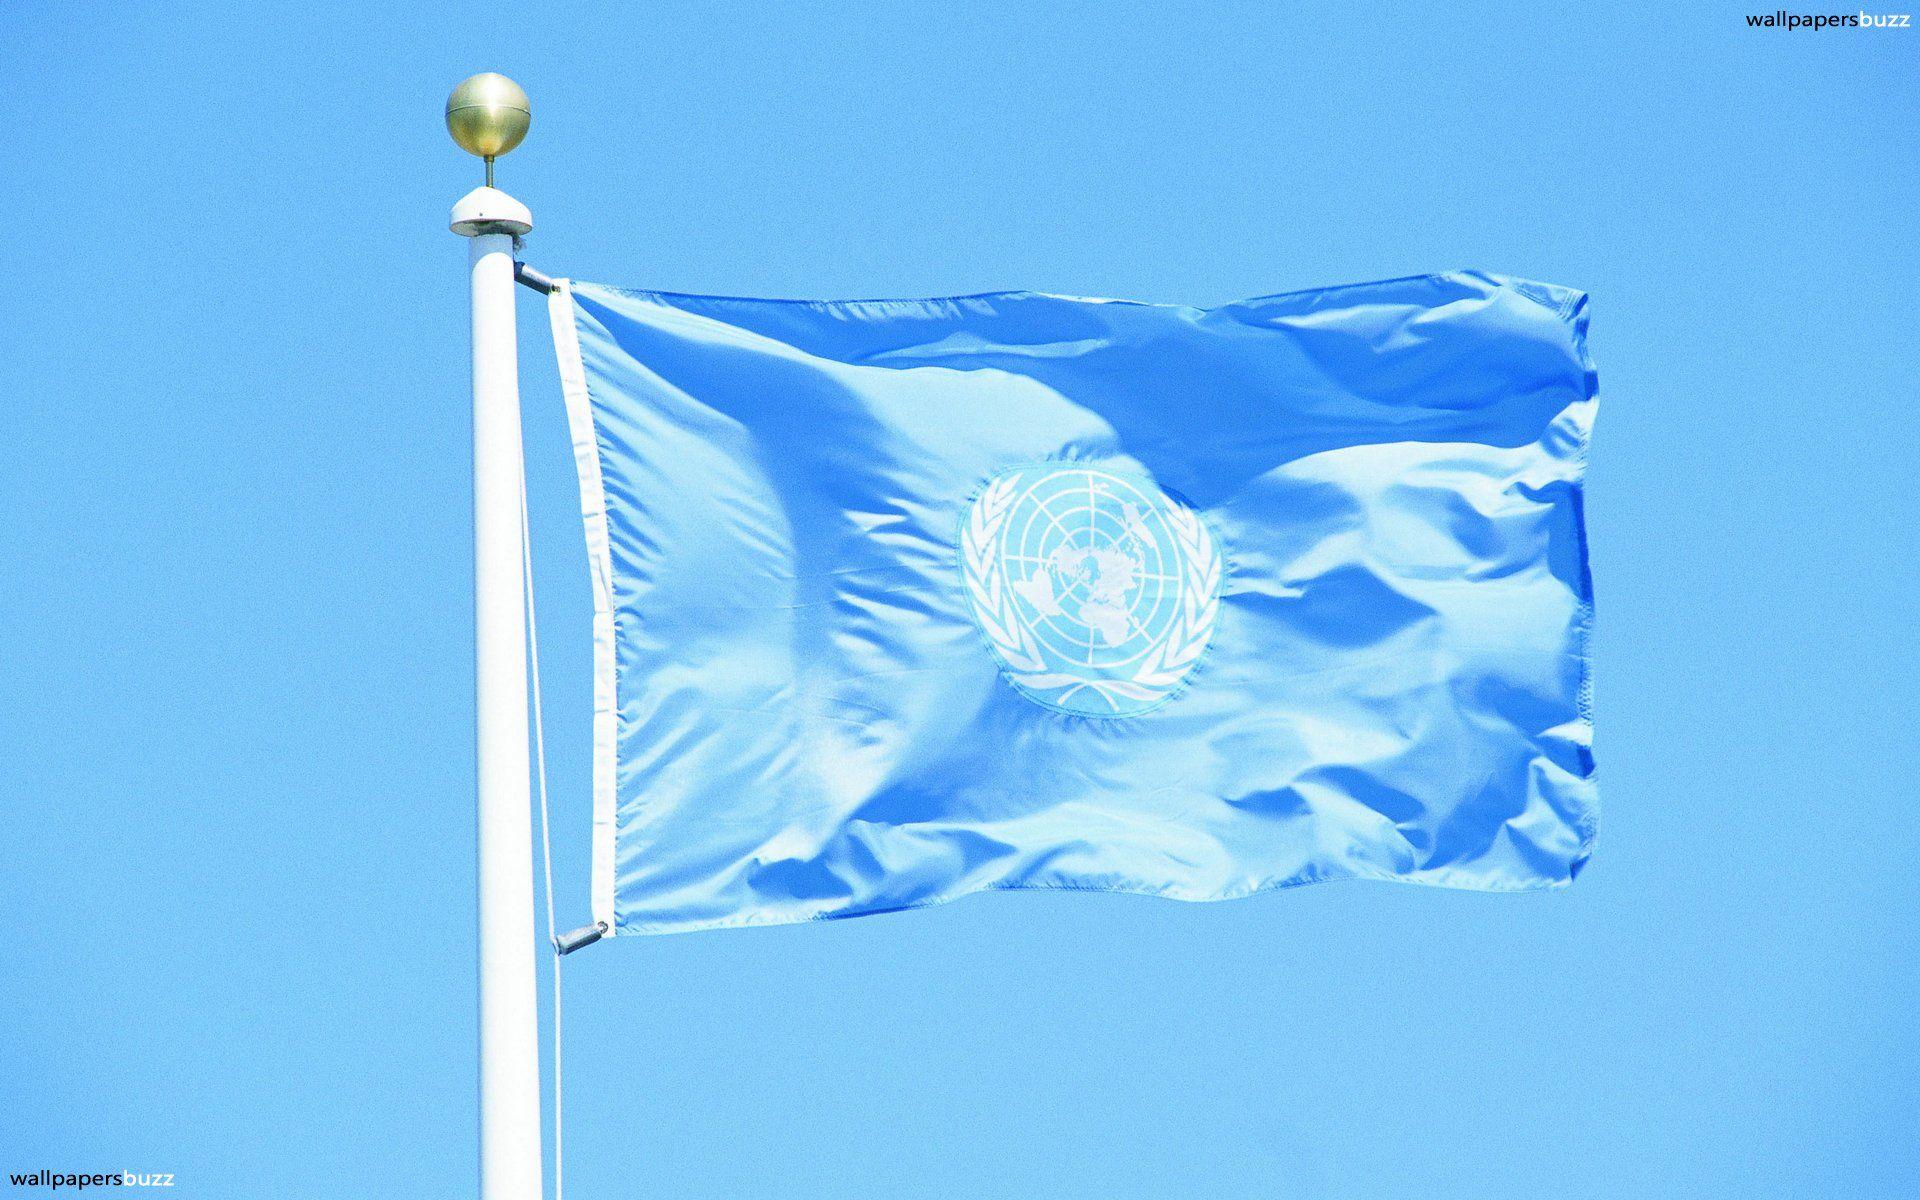 The flag of United Nations organisation HD Wallpaper